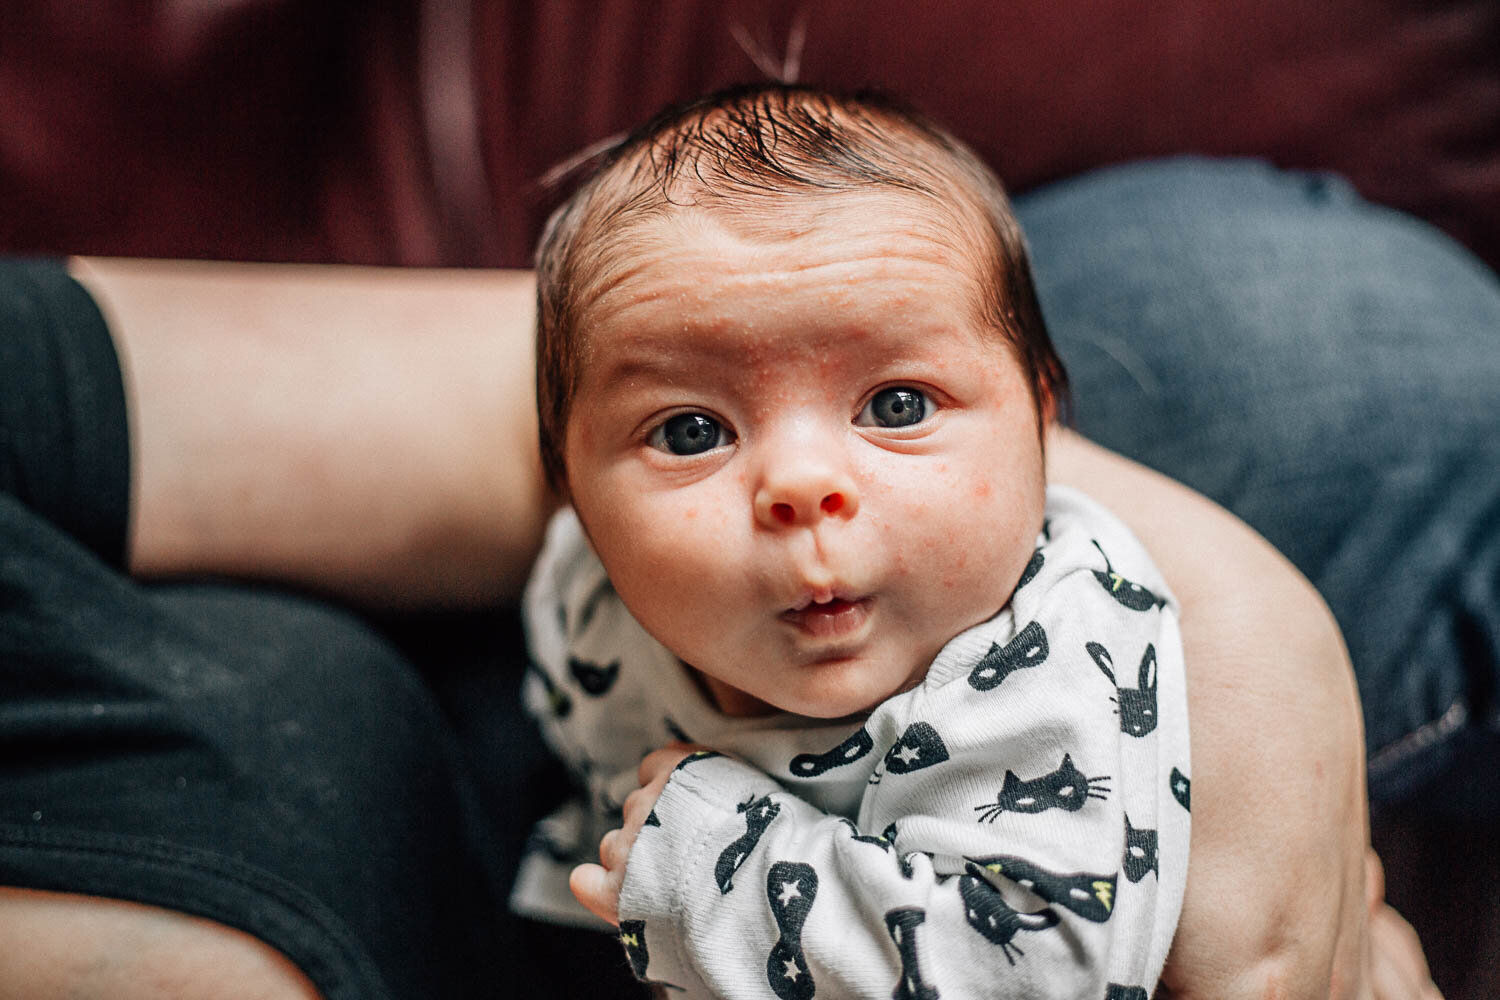 Hampton Roads newborn photographers capture small baby with dark hair awake and looking at the camera with wide eyes as his mother holds him in her arms